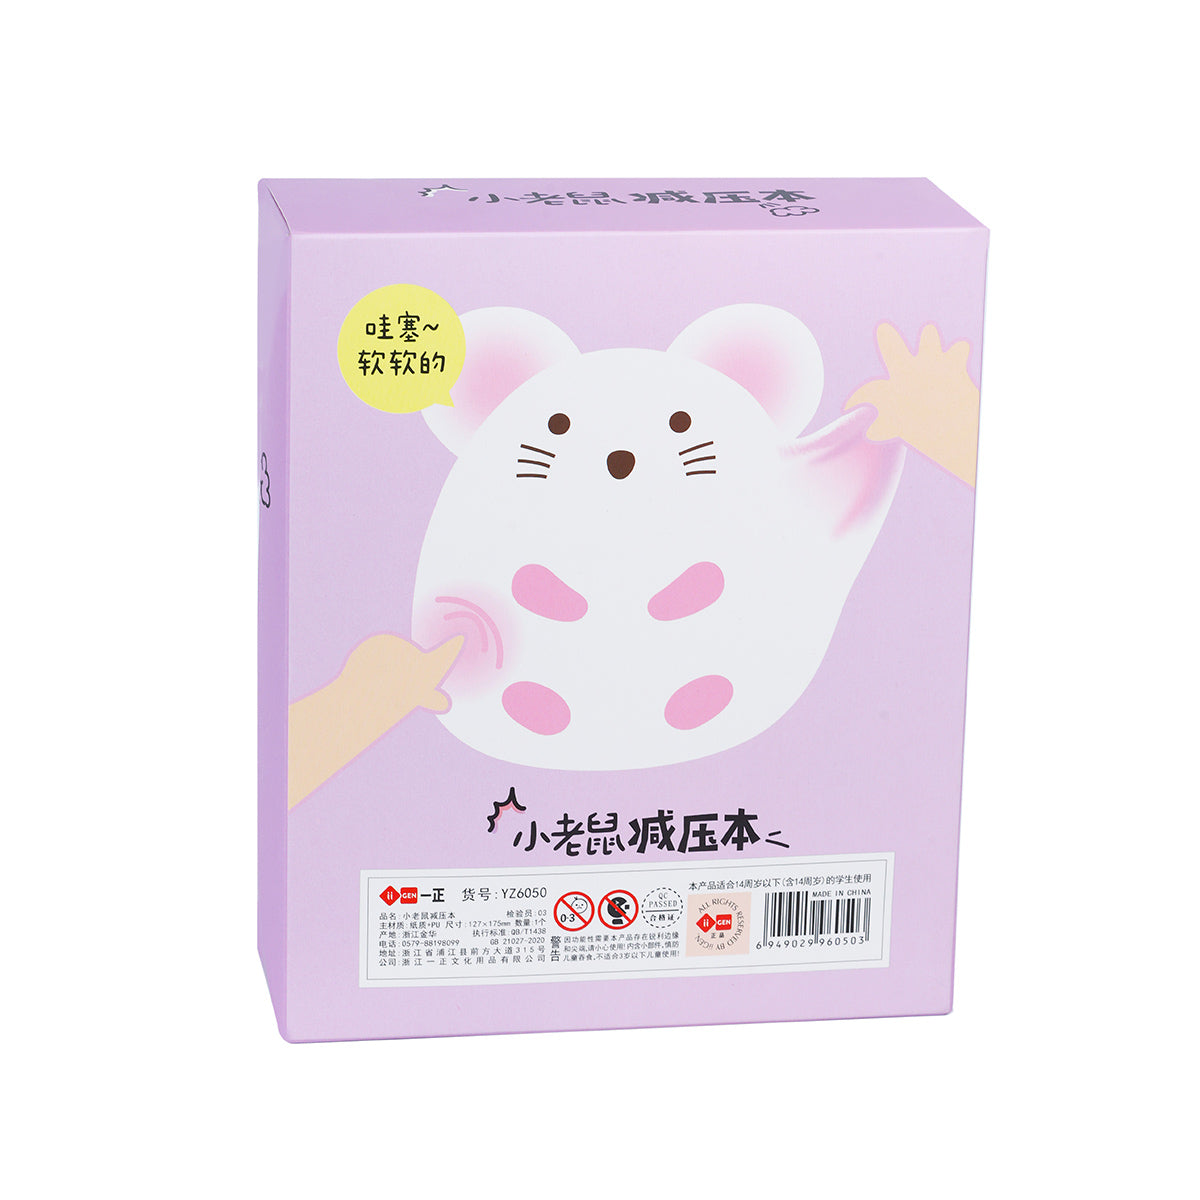 Cute 3D Big Squishy Notebook - Mouse